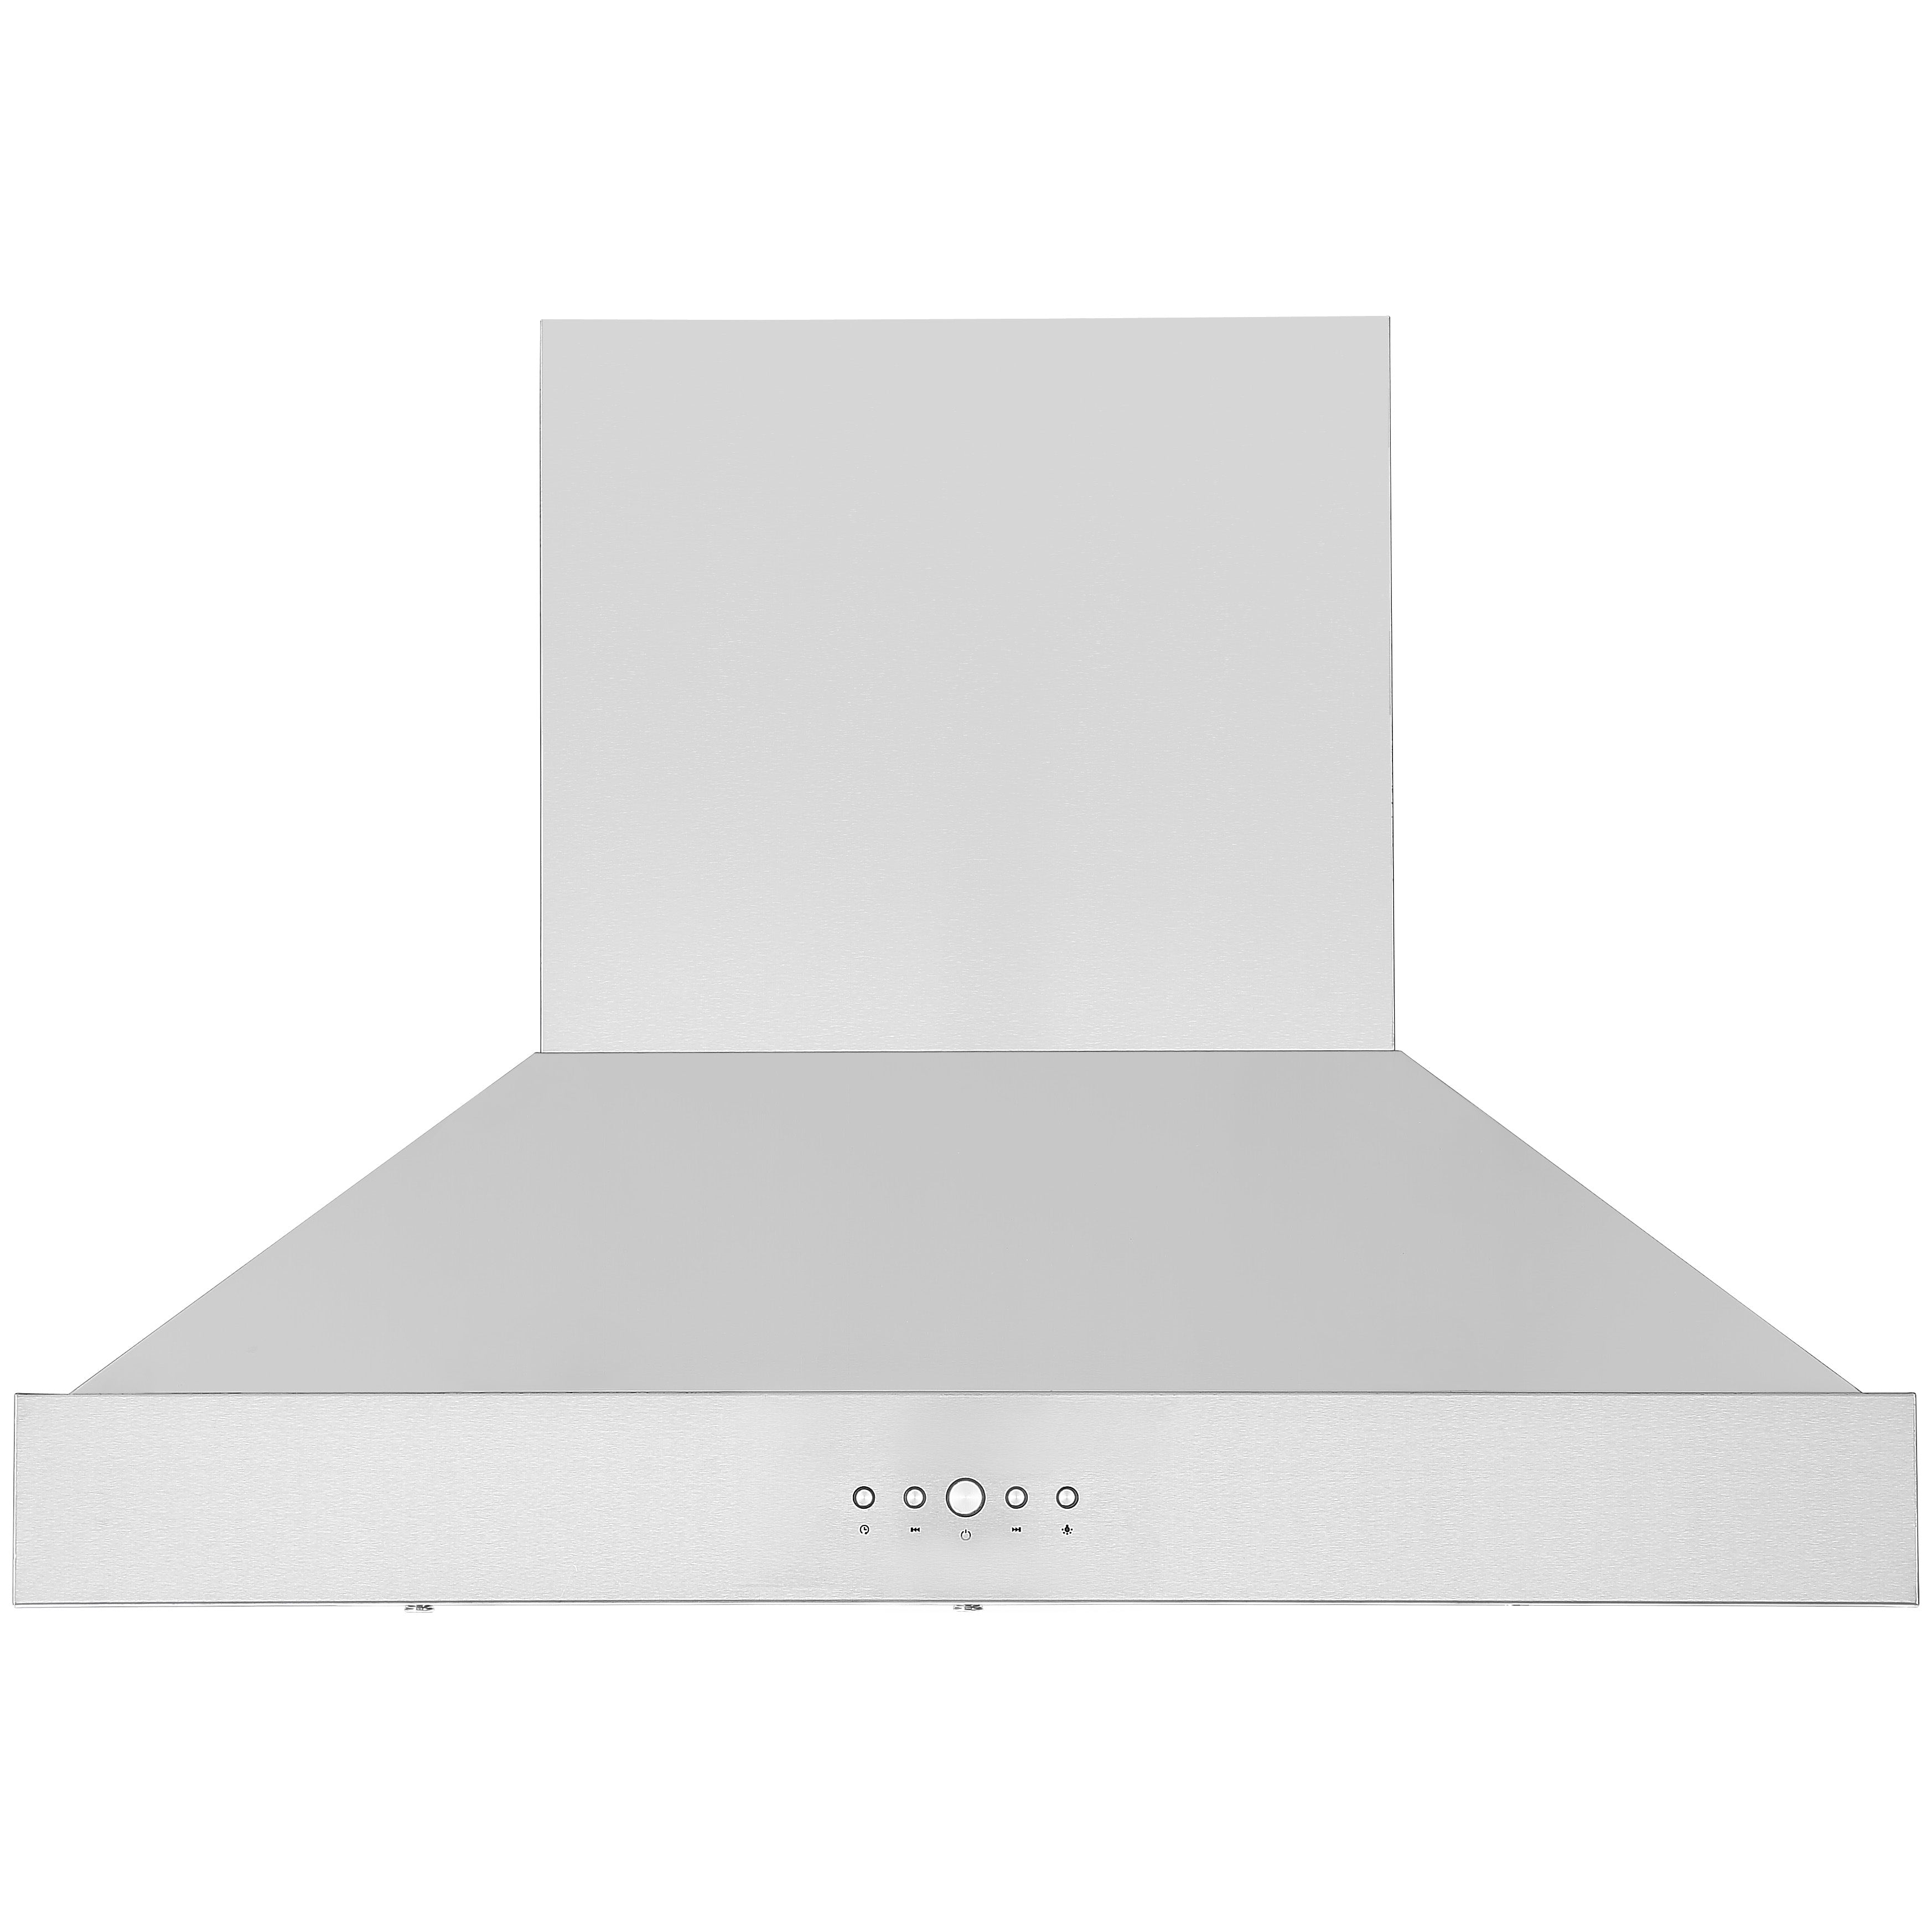 36 in. Pro Series Wall-Mounted Pyramid Range Hood in Stainless Steel